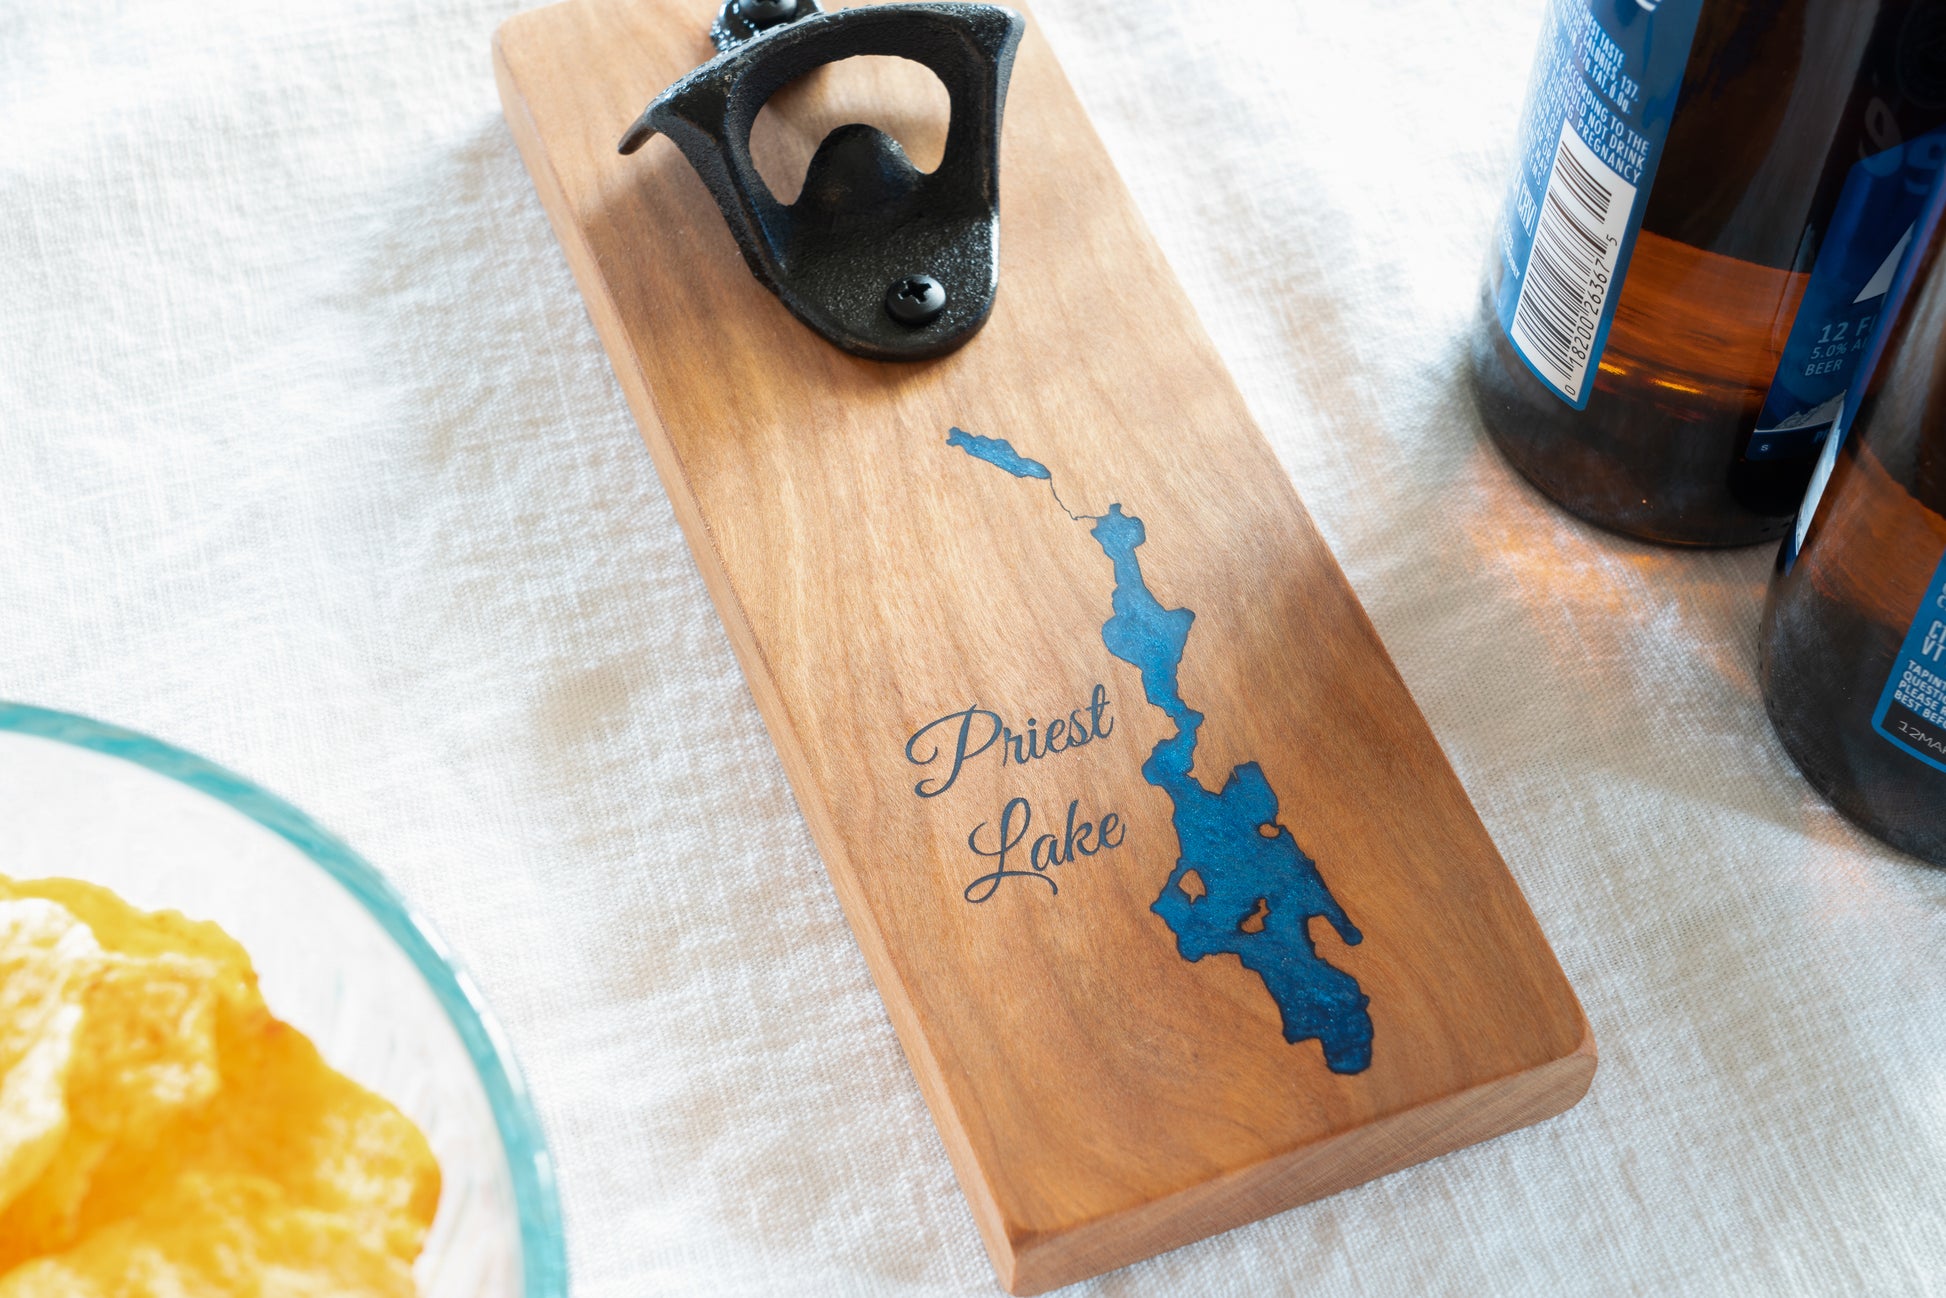 Cherry Bottle Opener with Epoxy Filled Priest lake